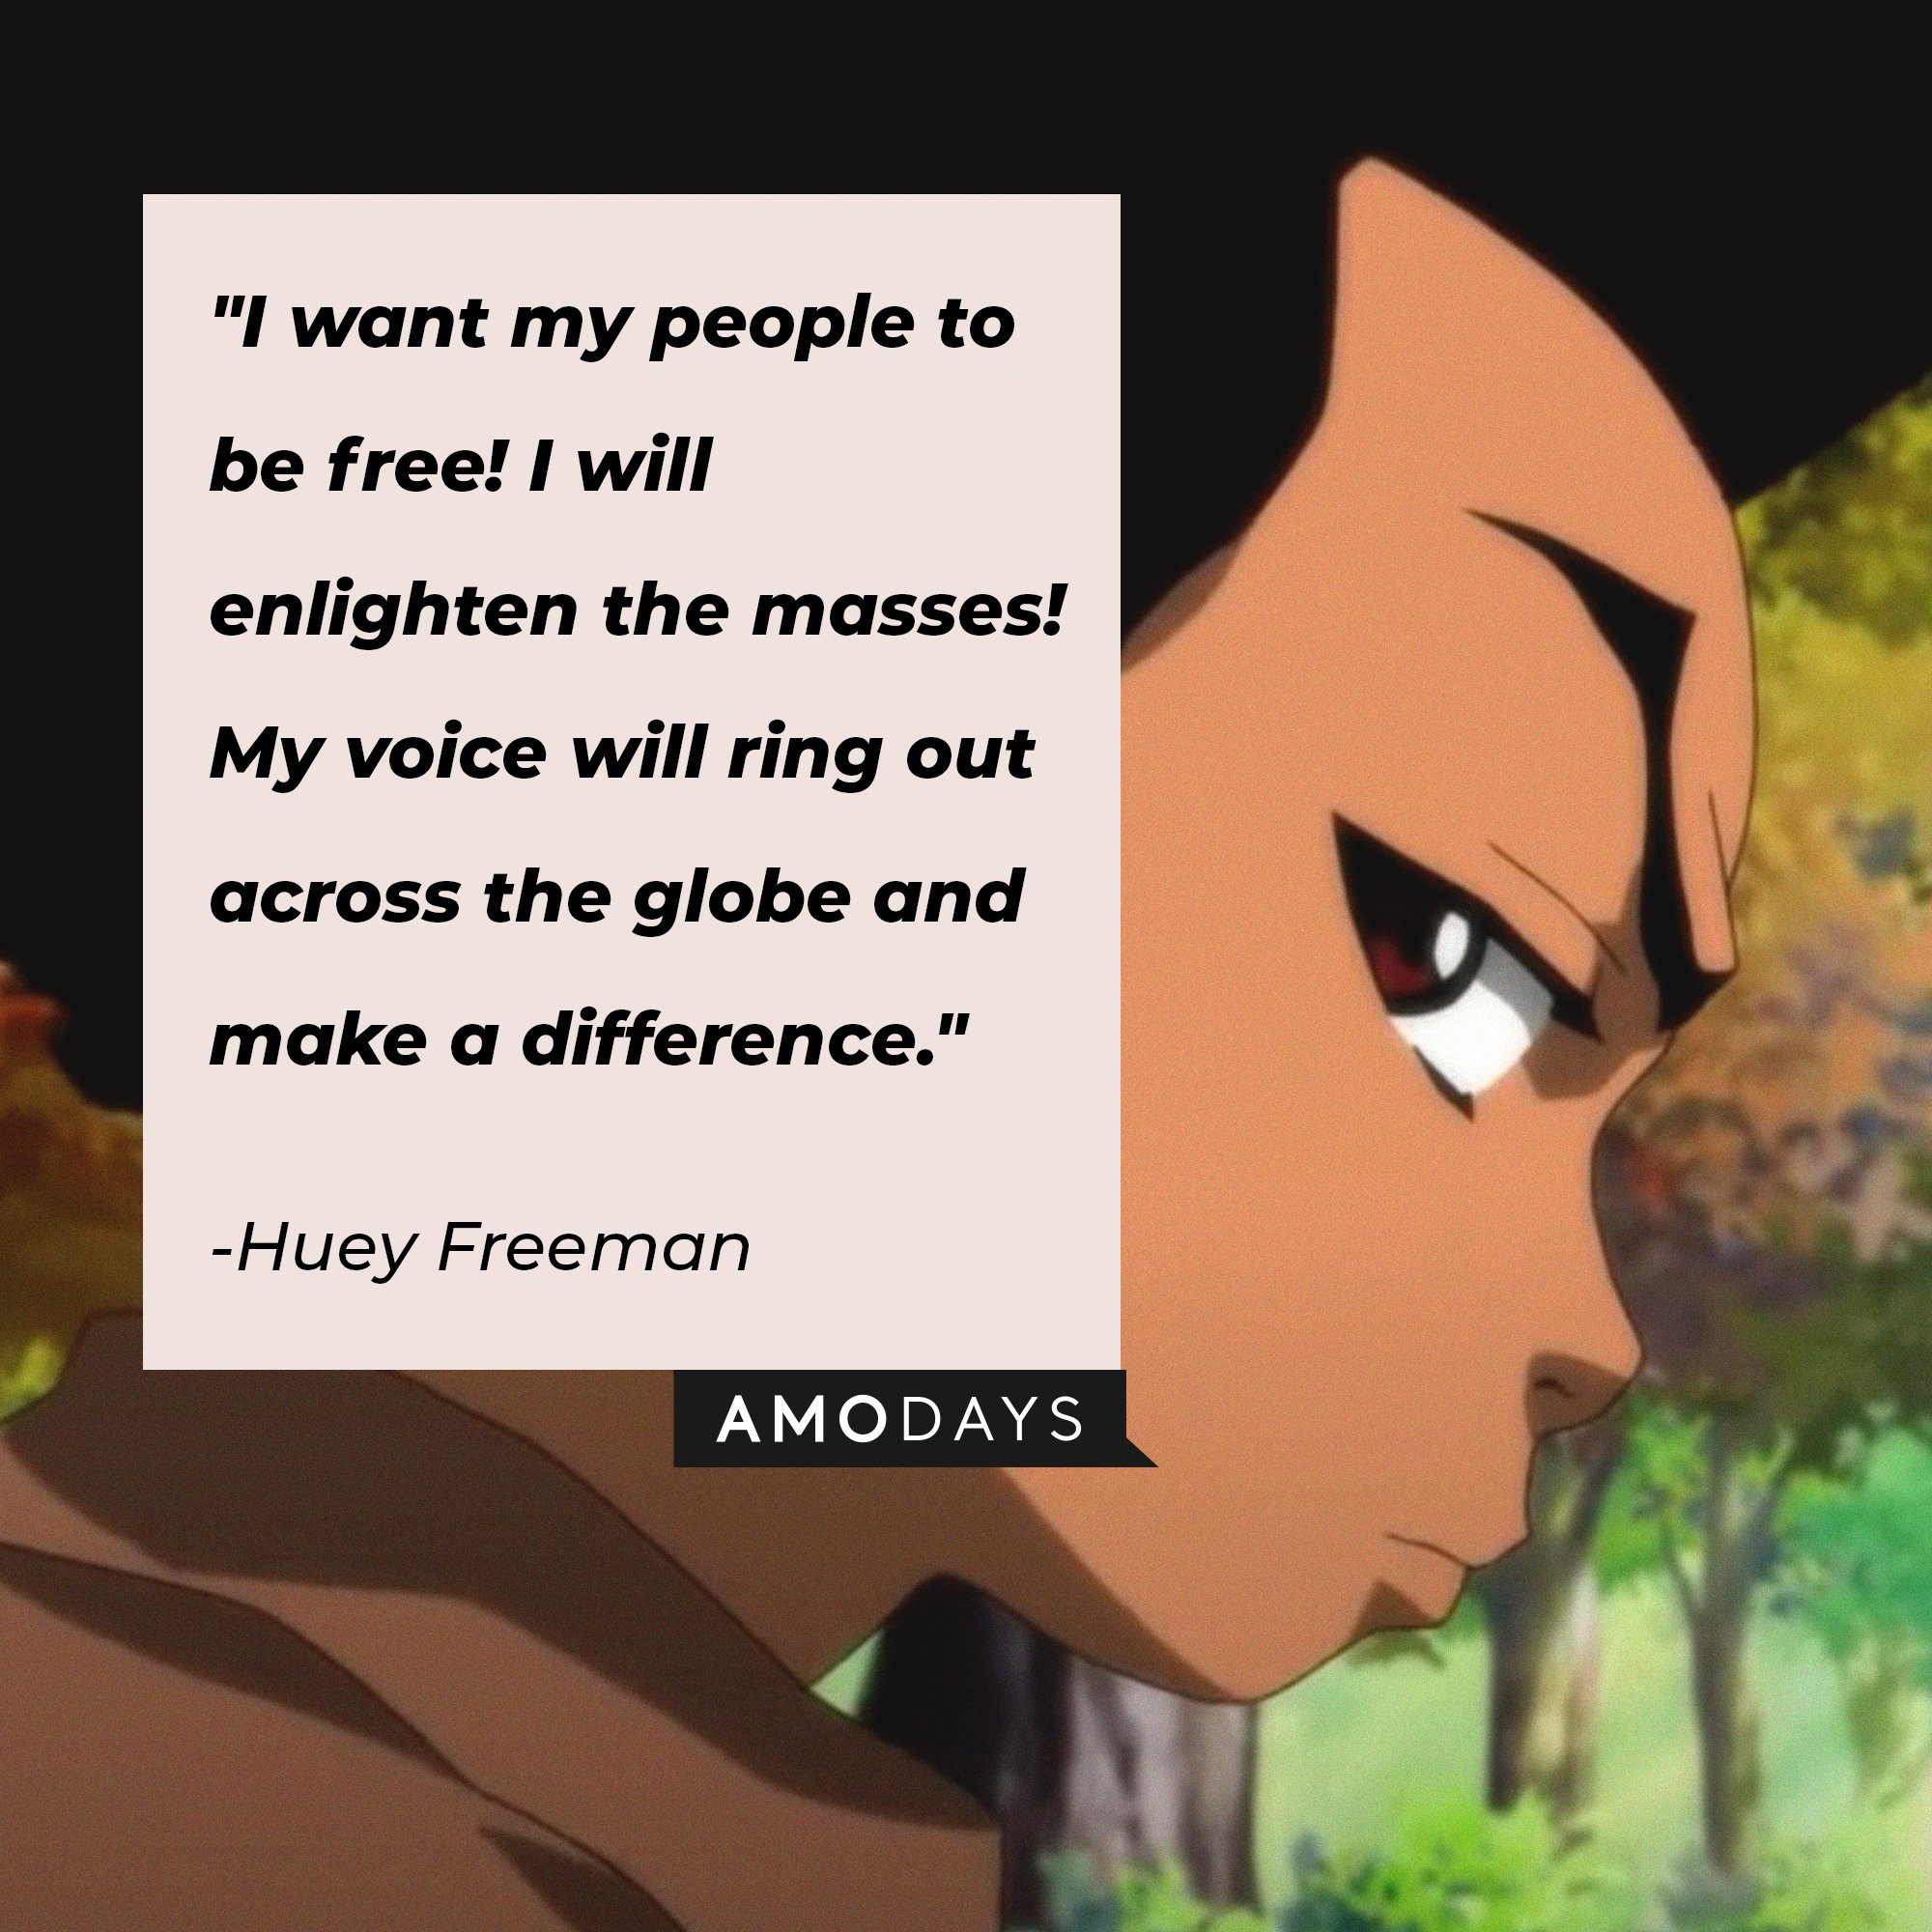 Huey Freeman's quote: "I want my people to be free! I will enlighten the masses! My voice will ring out across the globe and make a difference." | Image: AmoDays